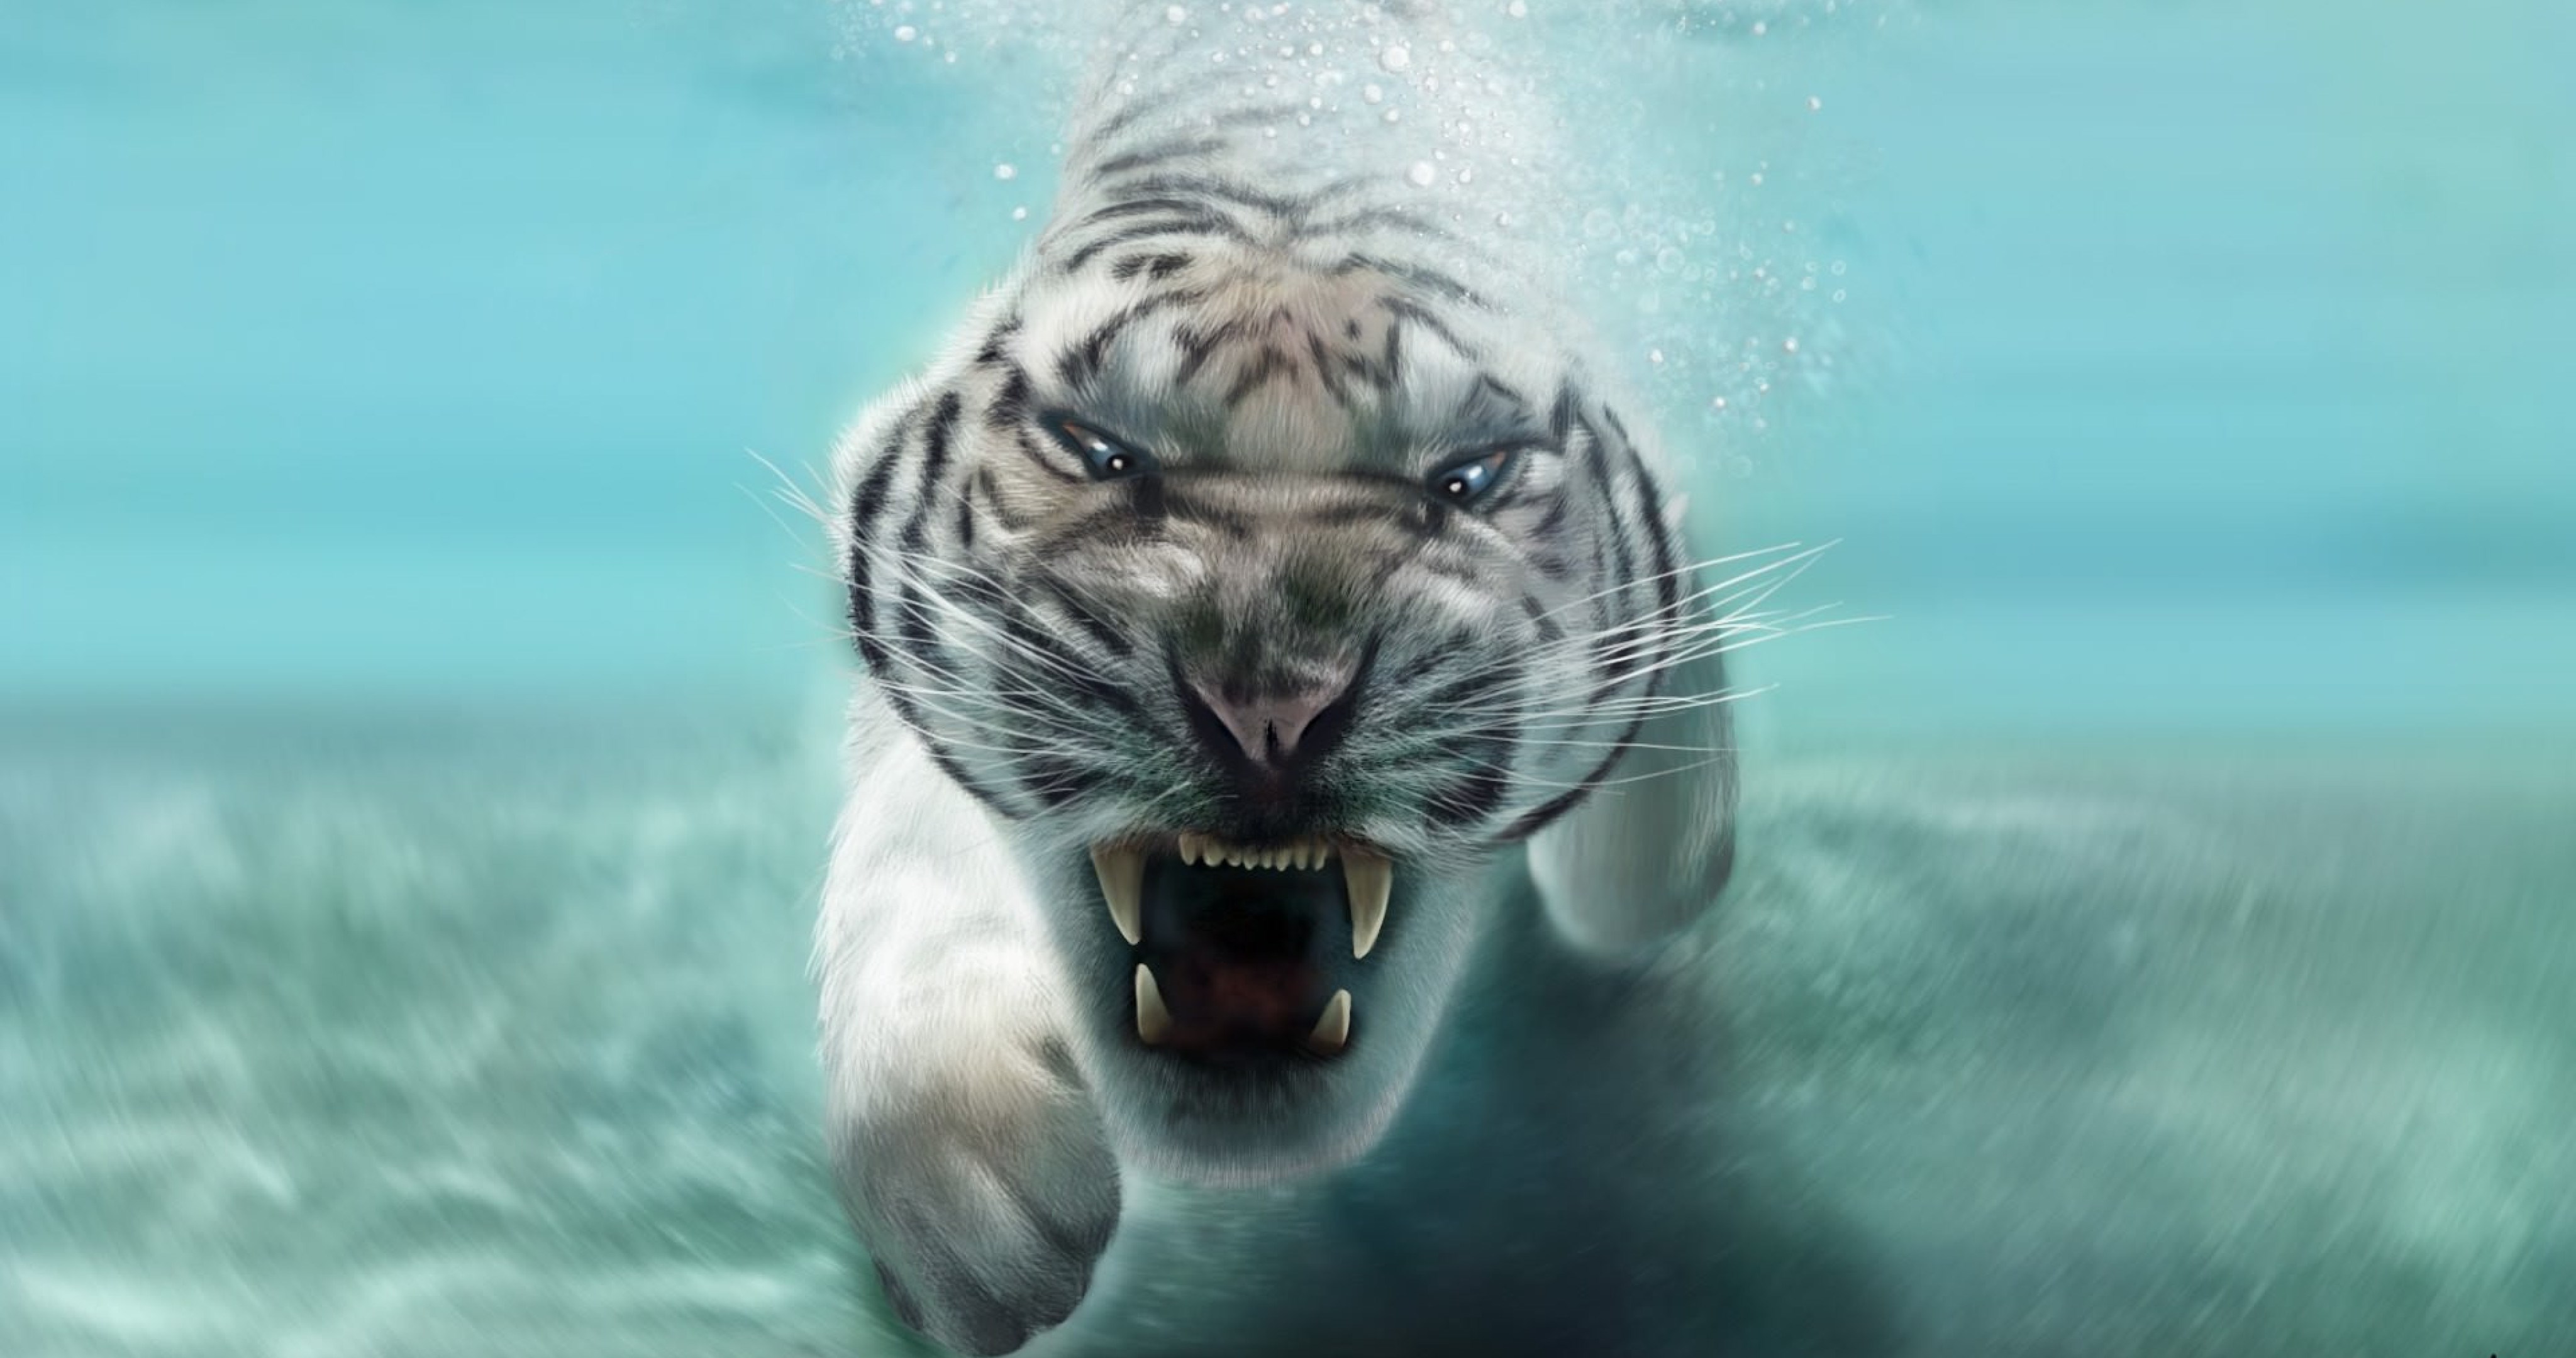 White Tiger In Water 4k Ultra HD Wallpaper High Quality Walls